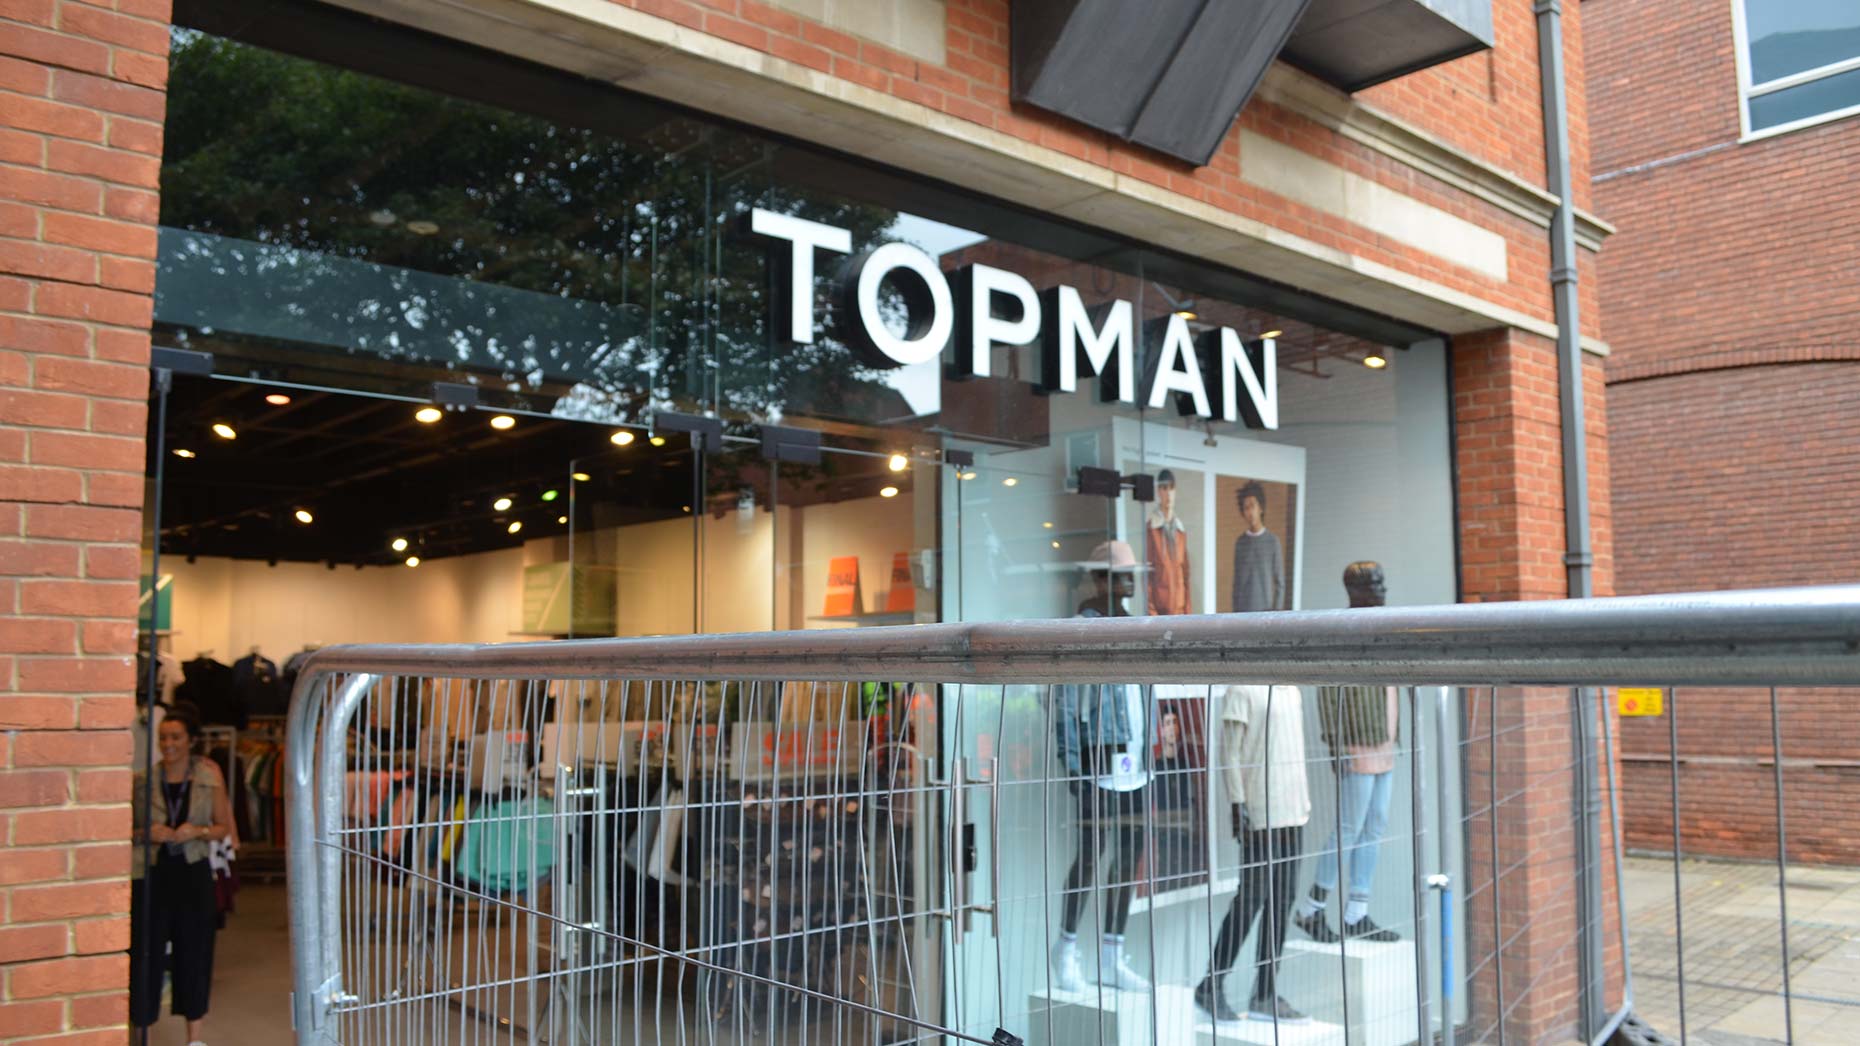 Topman has been the least affected by the works but has still seen a drop in trade. Photo: Sarah Harrison-Barker